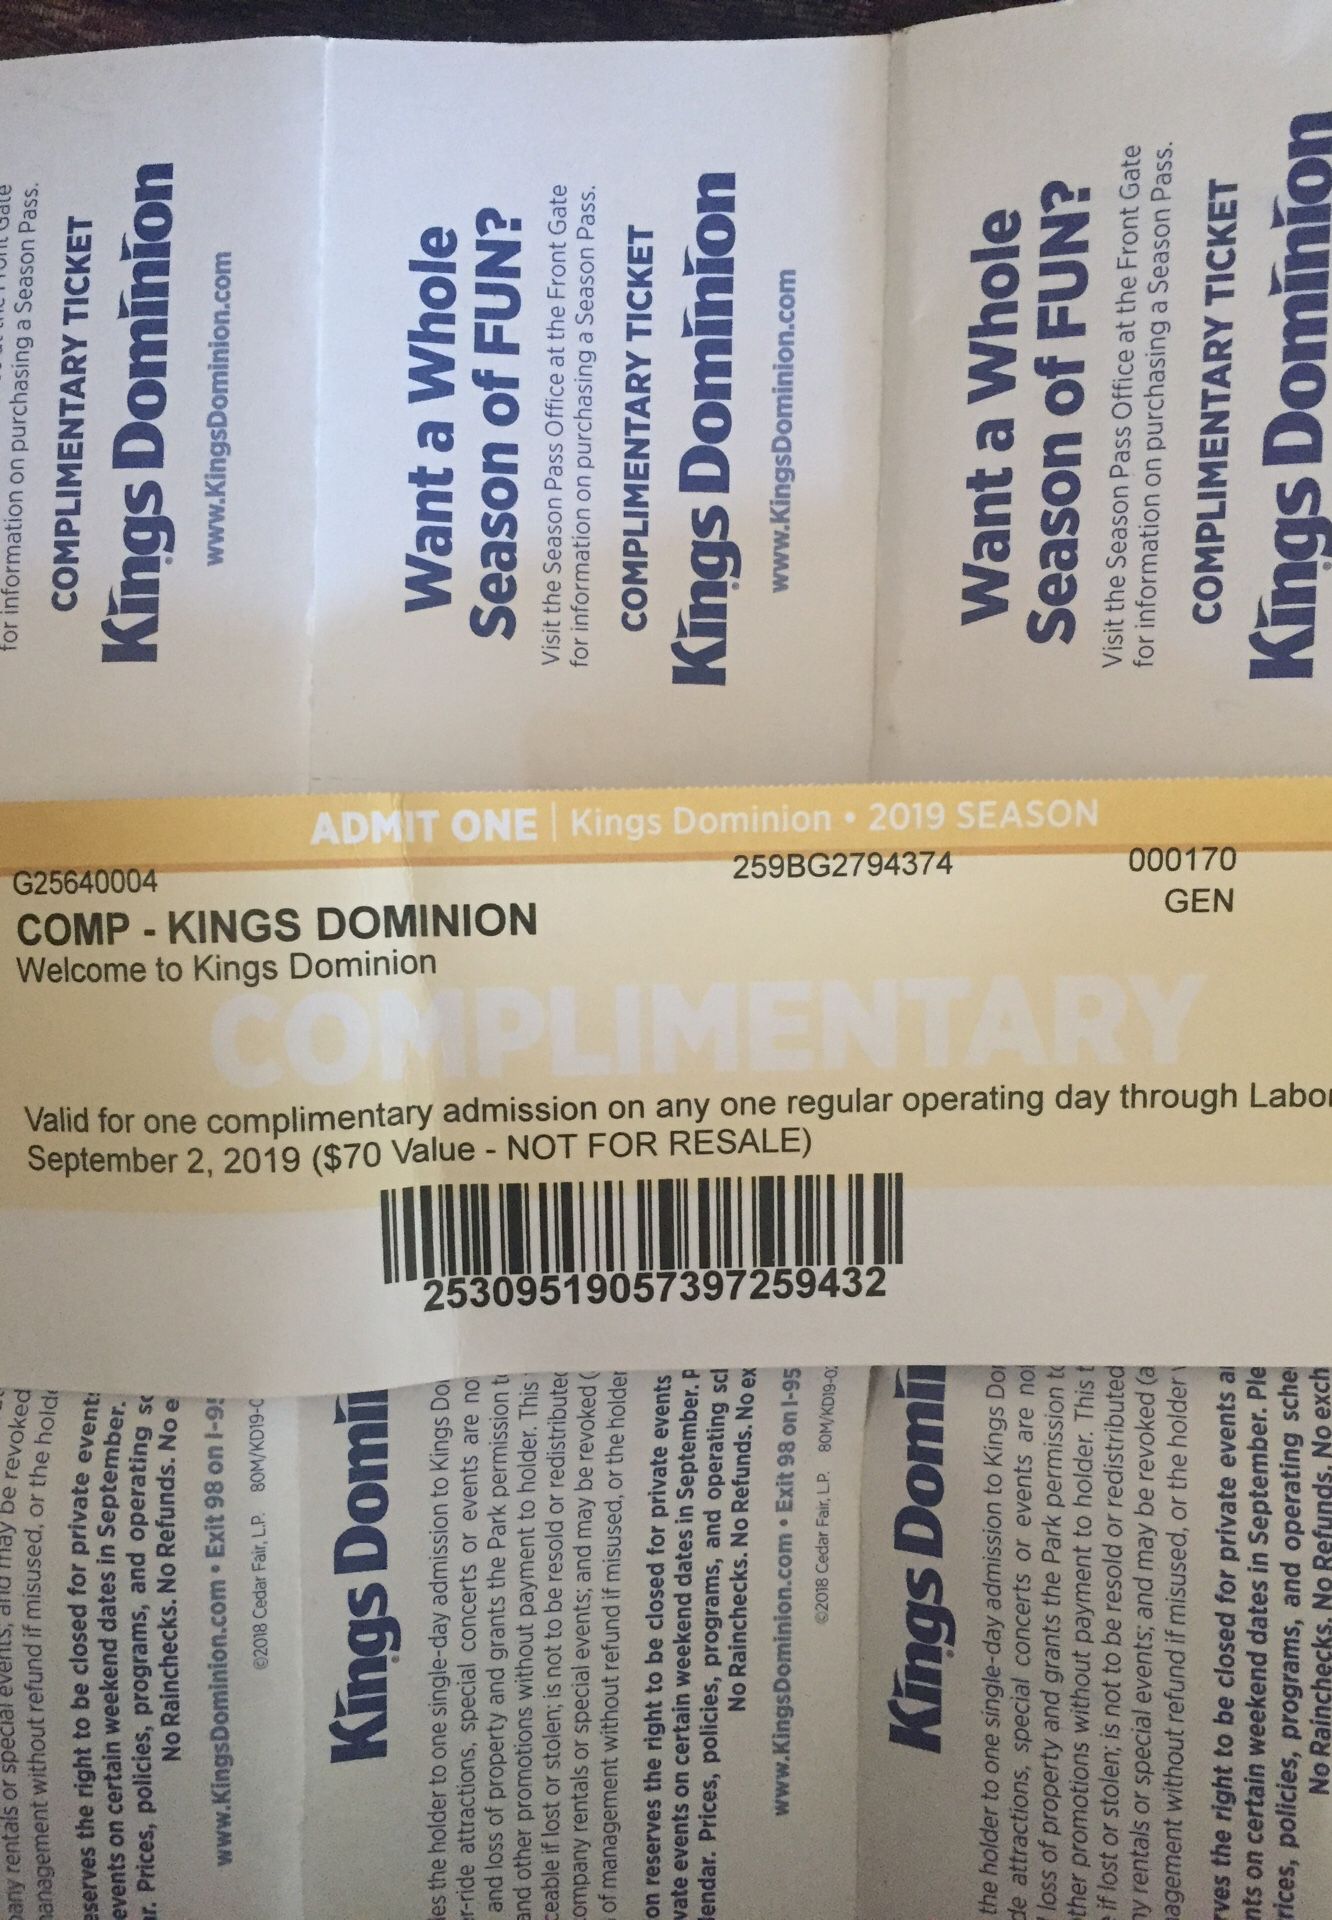 4 KINGS DOMINION TICKETS